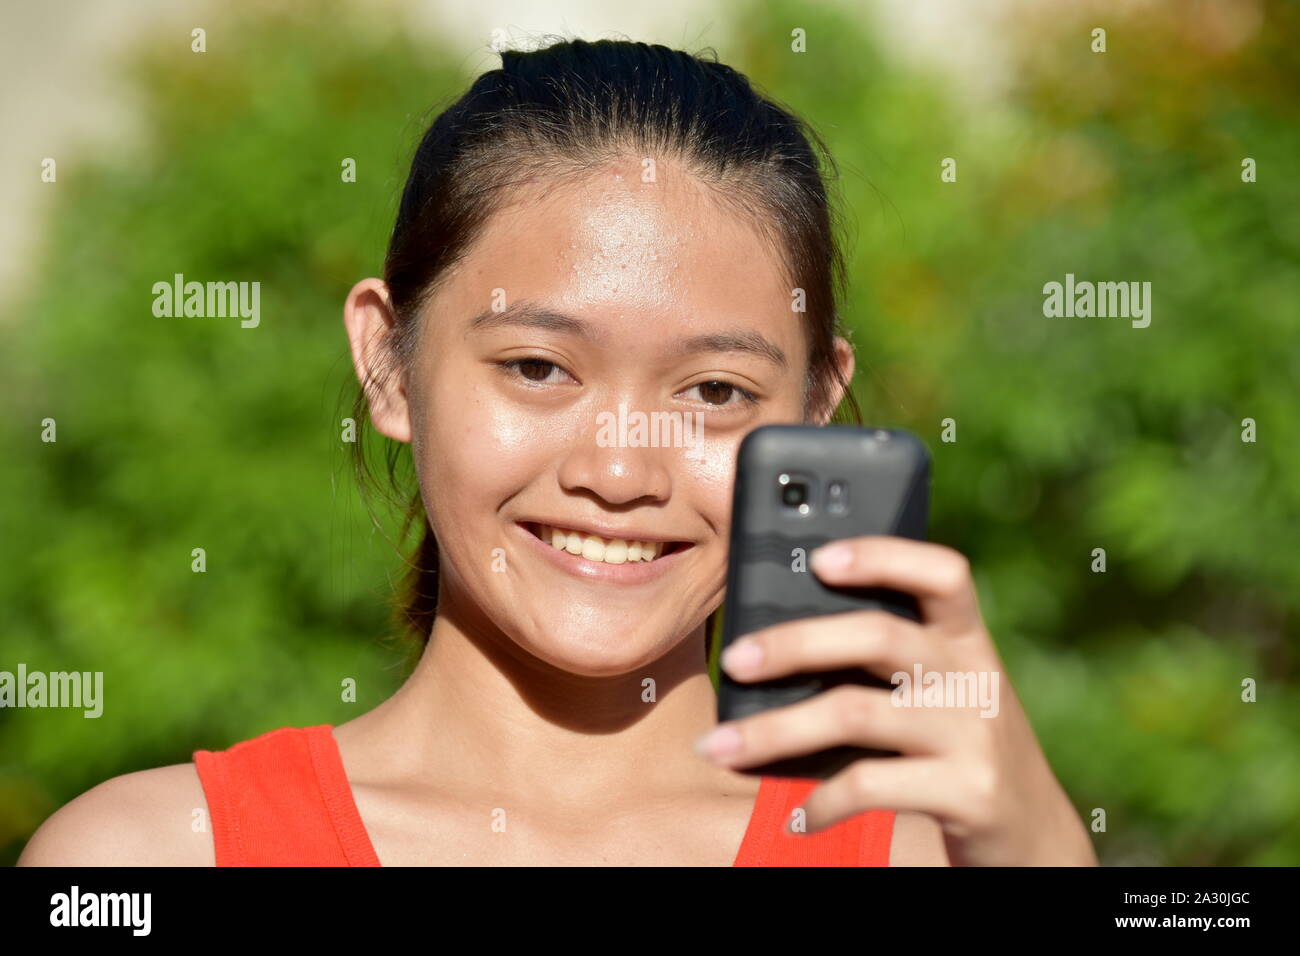 Selfy Of Beautiful Asian Female With Cellular Phone Stock Photo